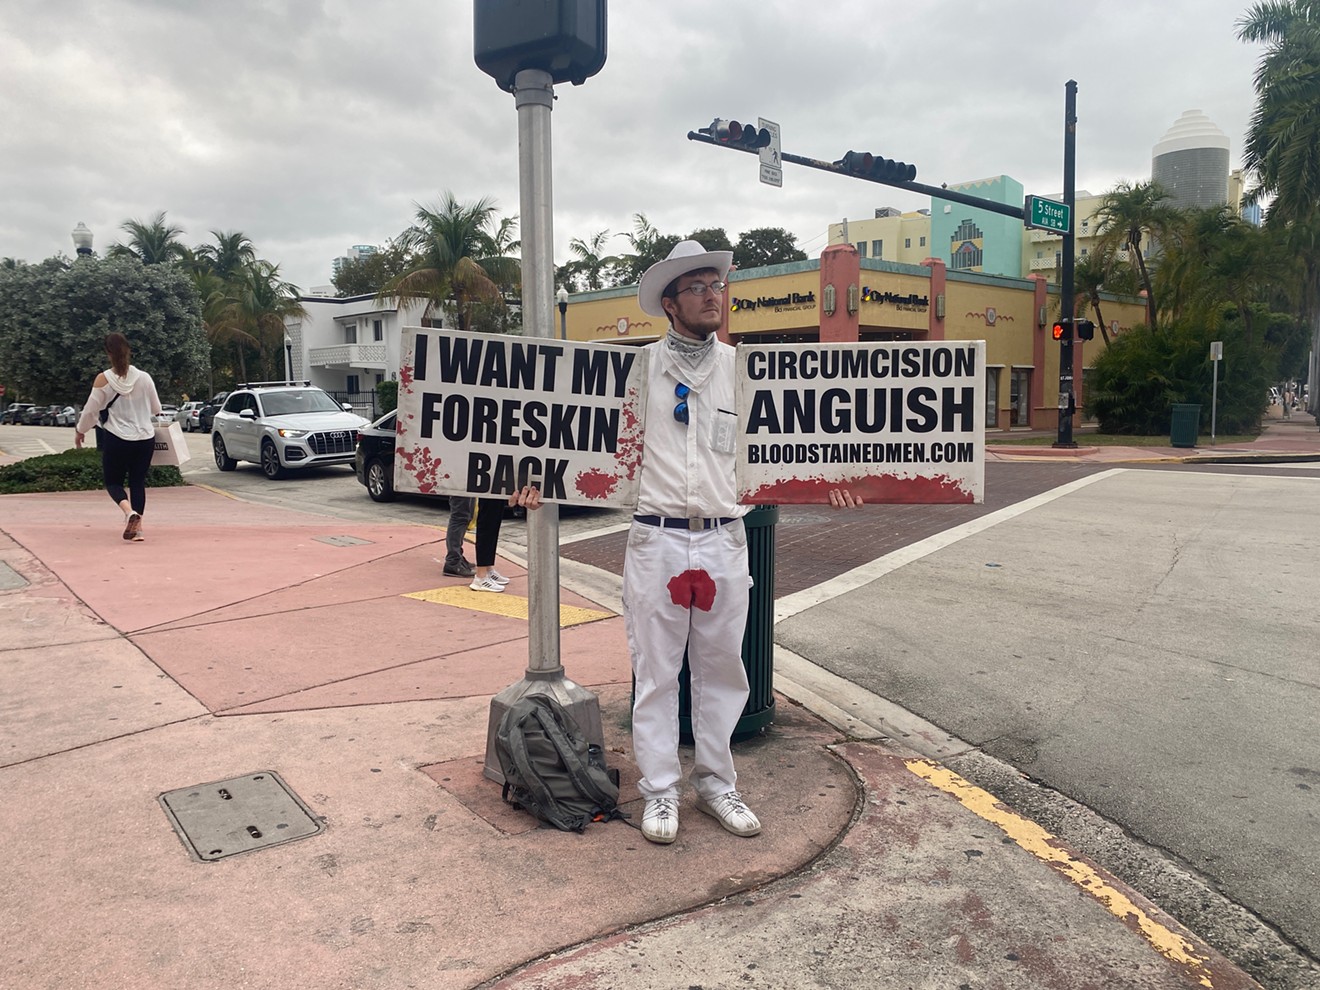 Bloodstained Men president David Atkinson protests circumcision in Miami Beach.